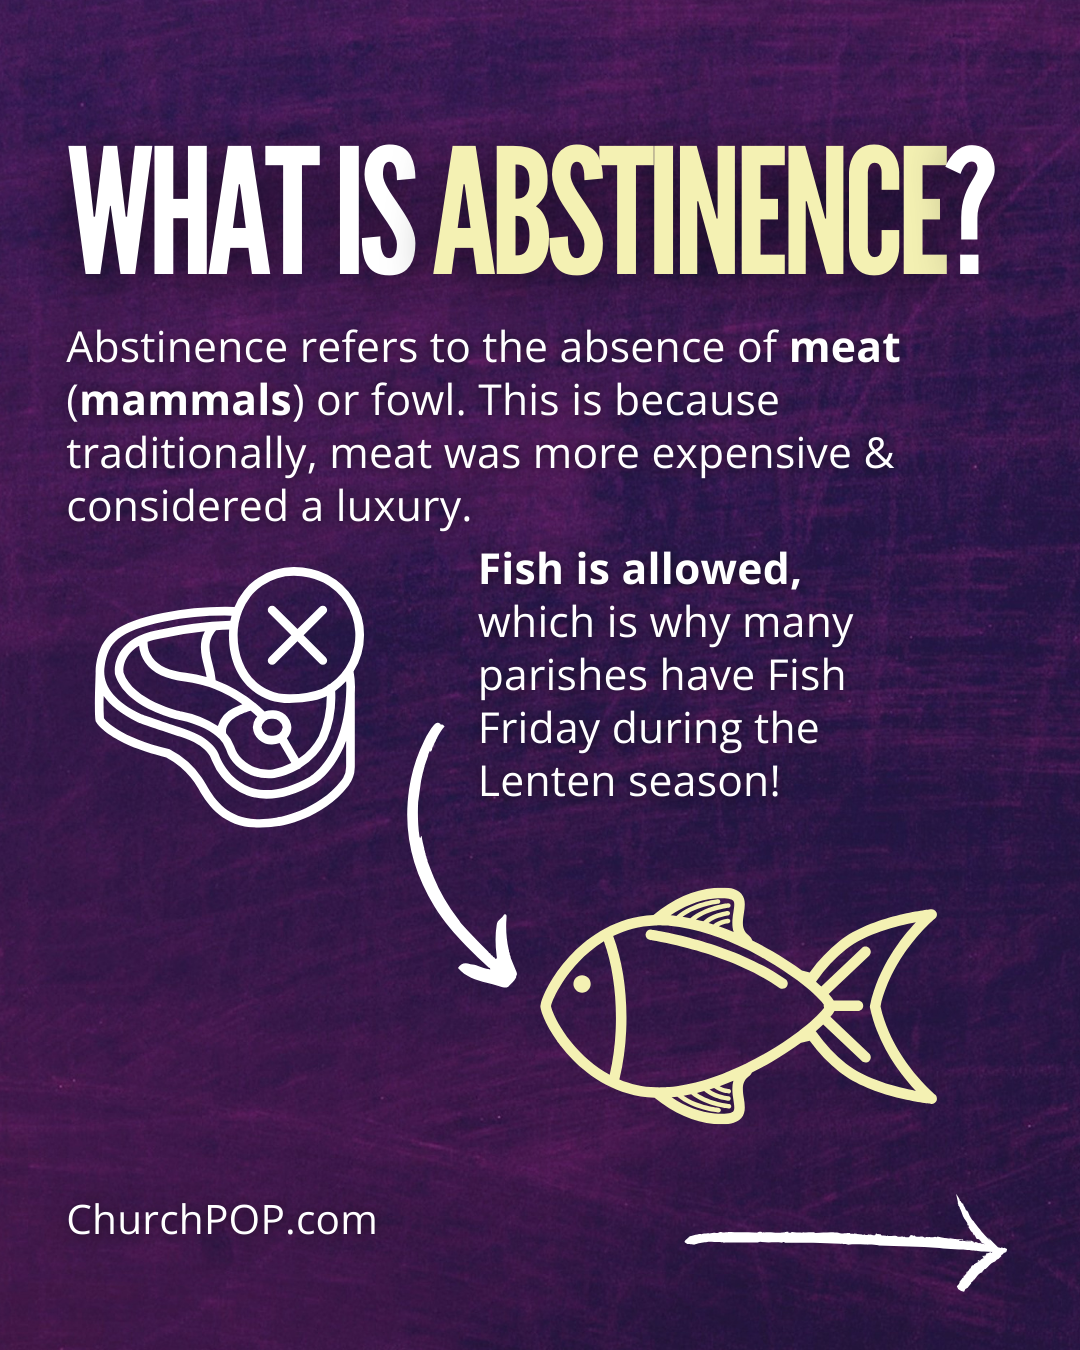 What is abstinence?